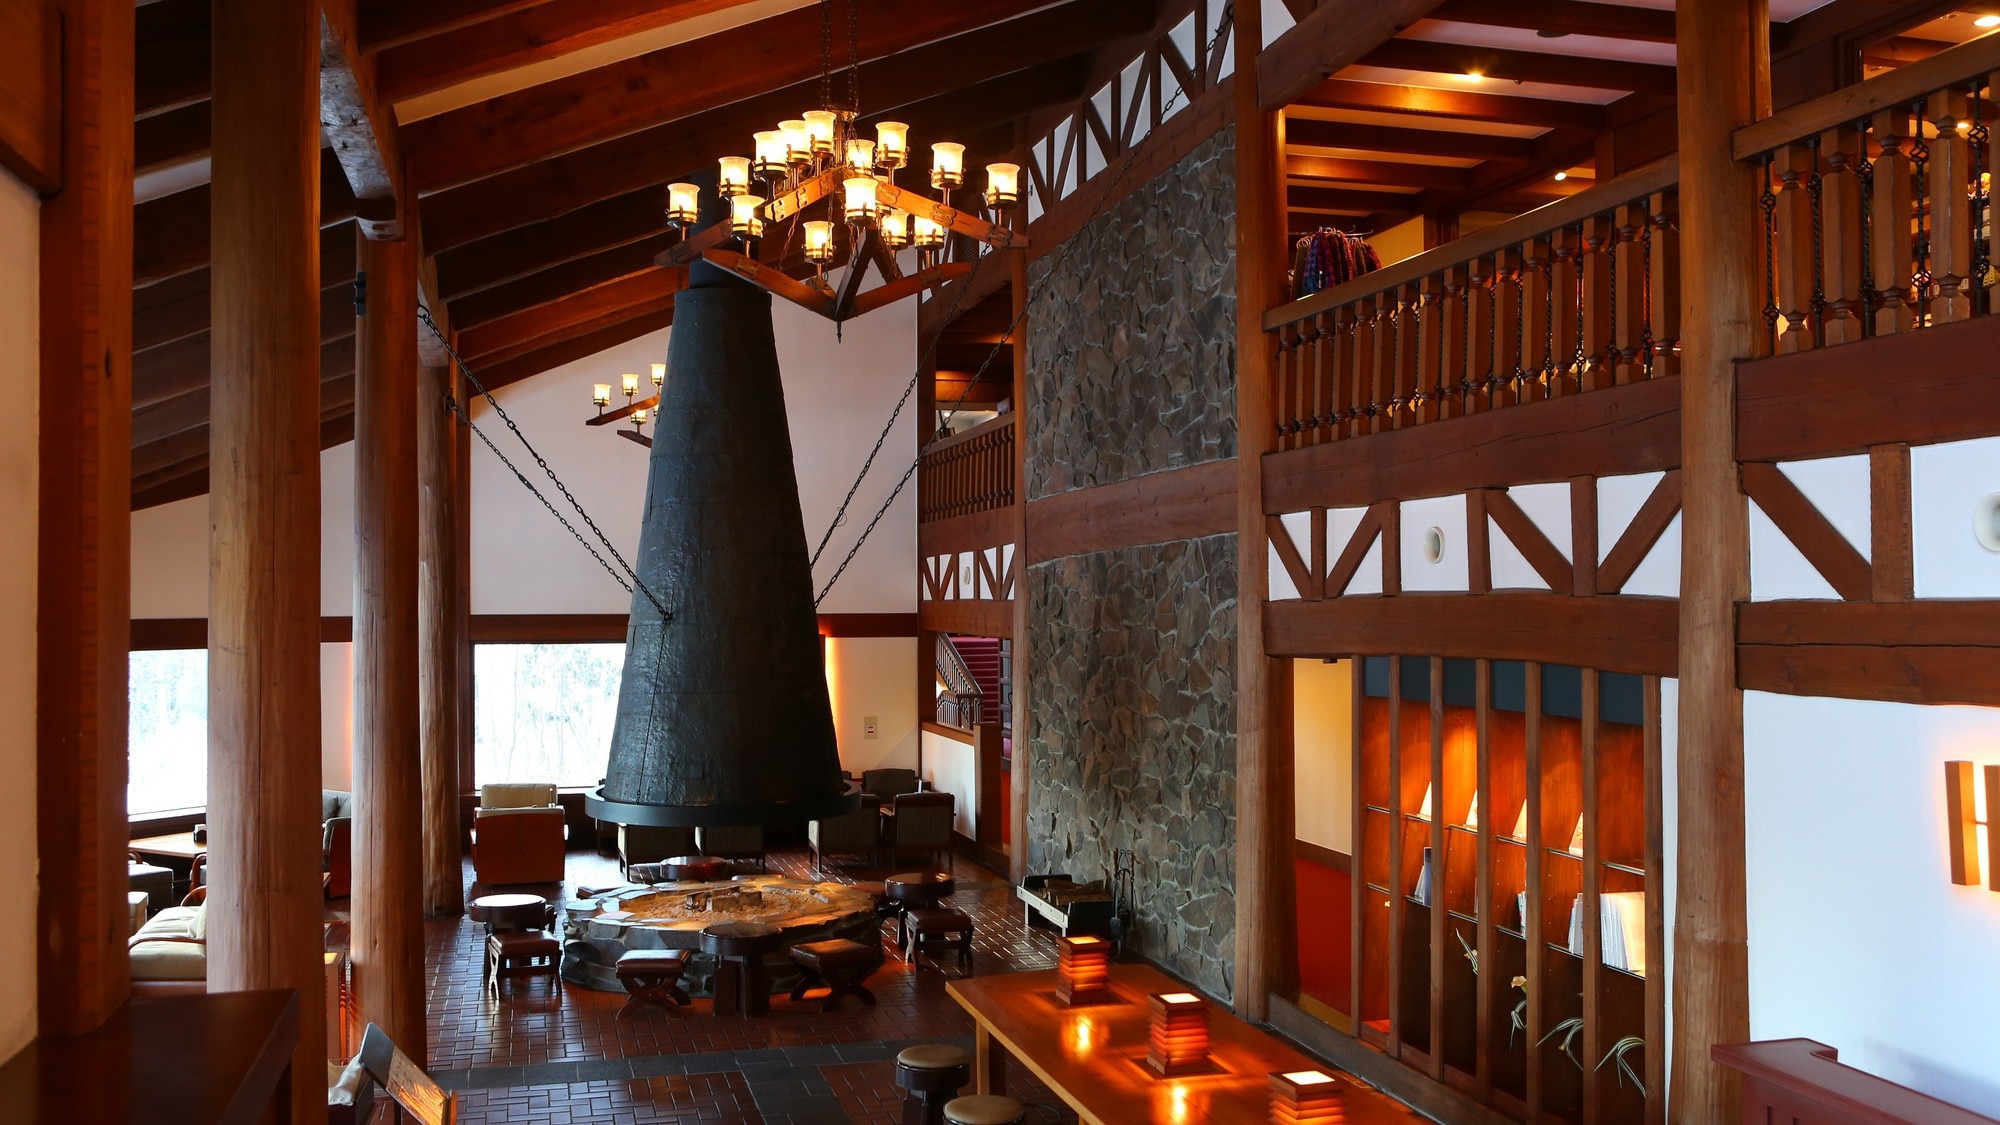 A lounge with the atmosphere of a mountain resort and the scent of firewood